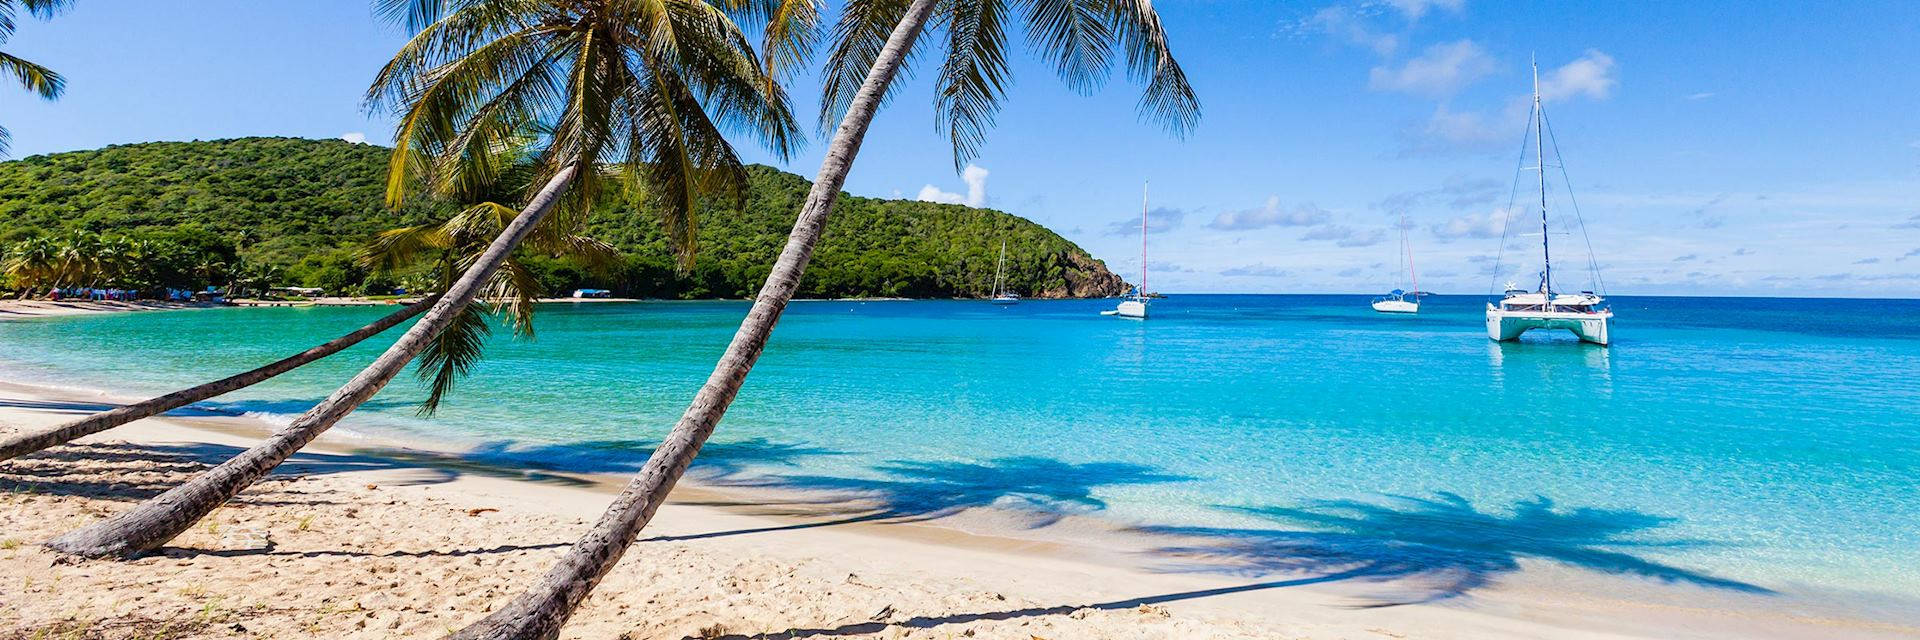 St Vincent And The Grenadines Leaning Coconut Trees Wallpaper